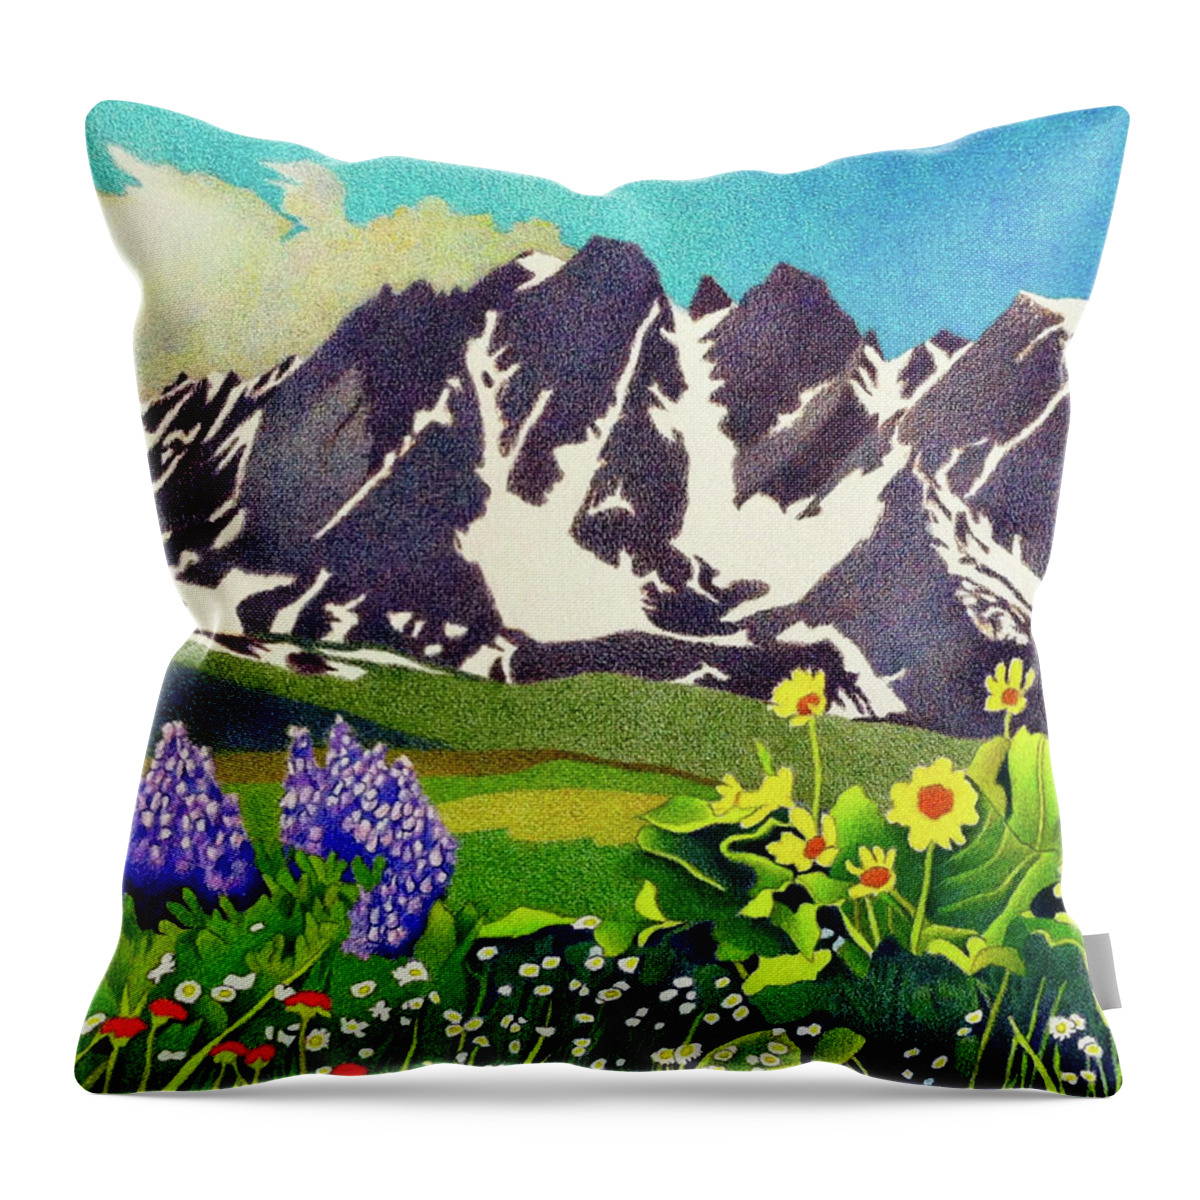 Art Throw Pillow featuring the drawing Gore Range Wildflowers by Dan Miller